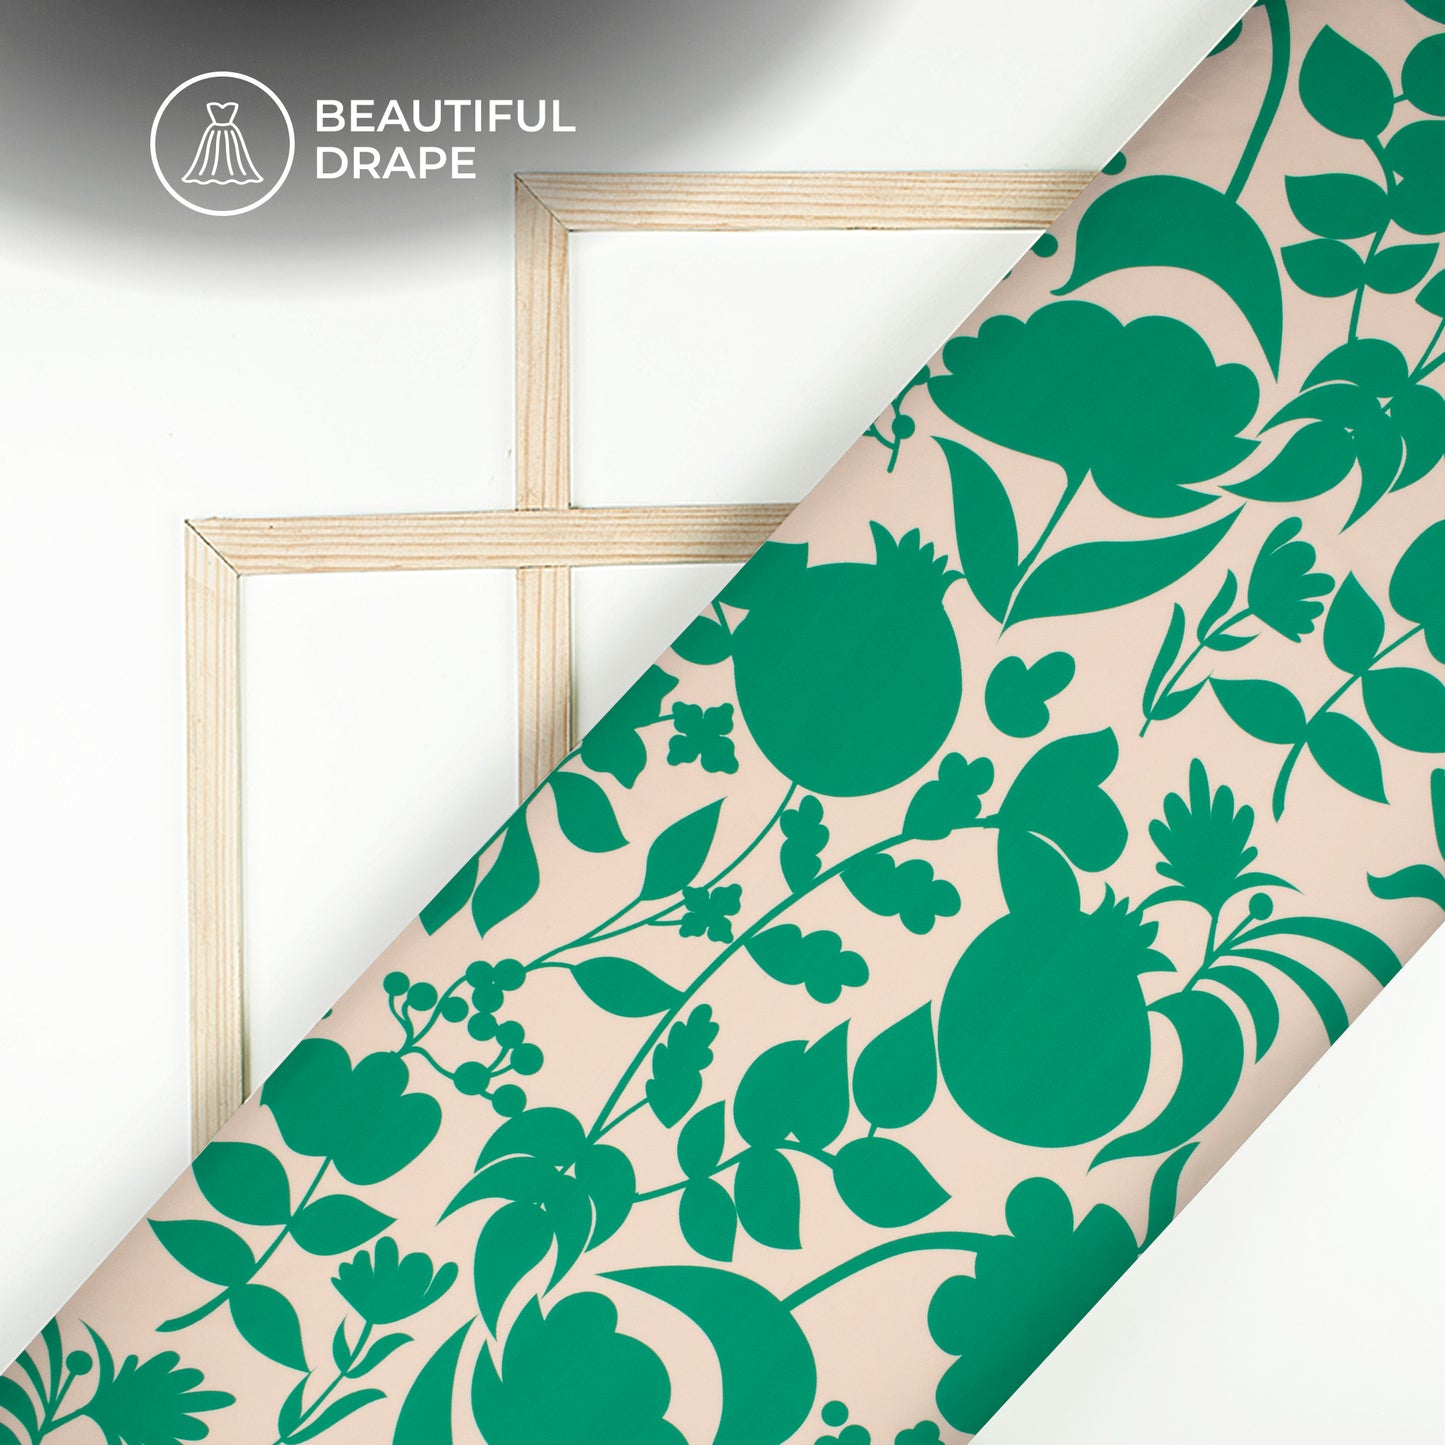 Green Floral Digital Print Imported Satin Fabric